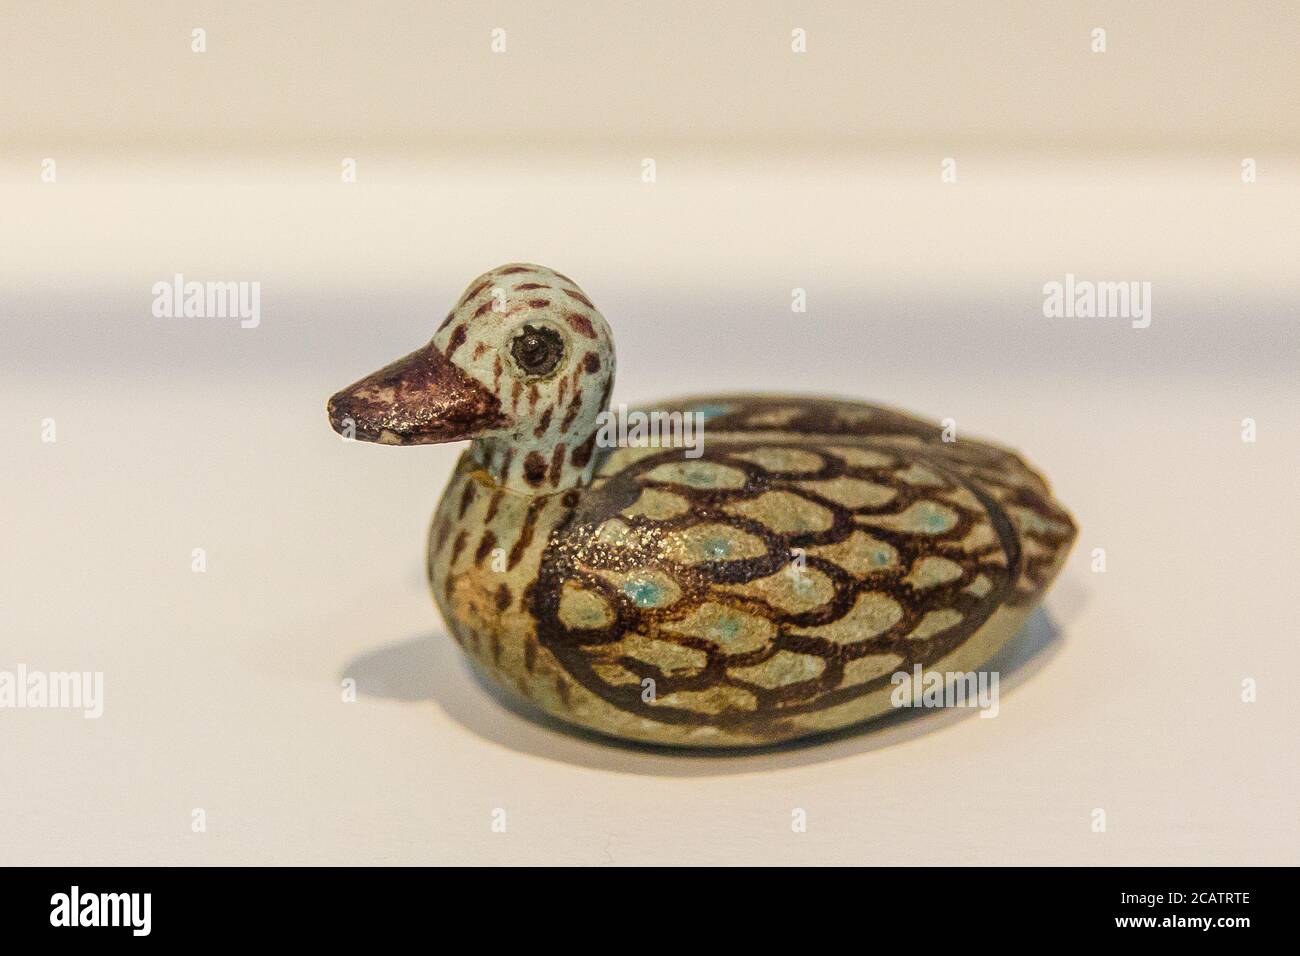 Exhibition 'The animal kingdom in Ancient Egypt', organized in 2015 by the Louvre Museum in Lens. Duck, faience, 12th dynasty. Stock Photo